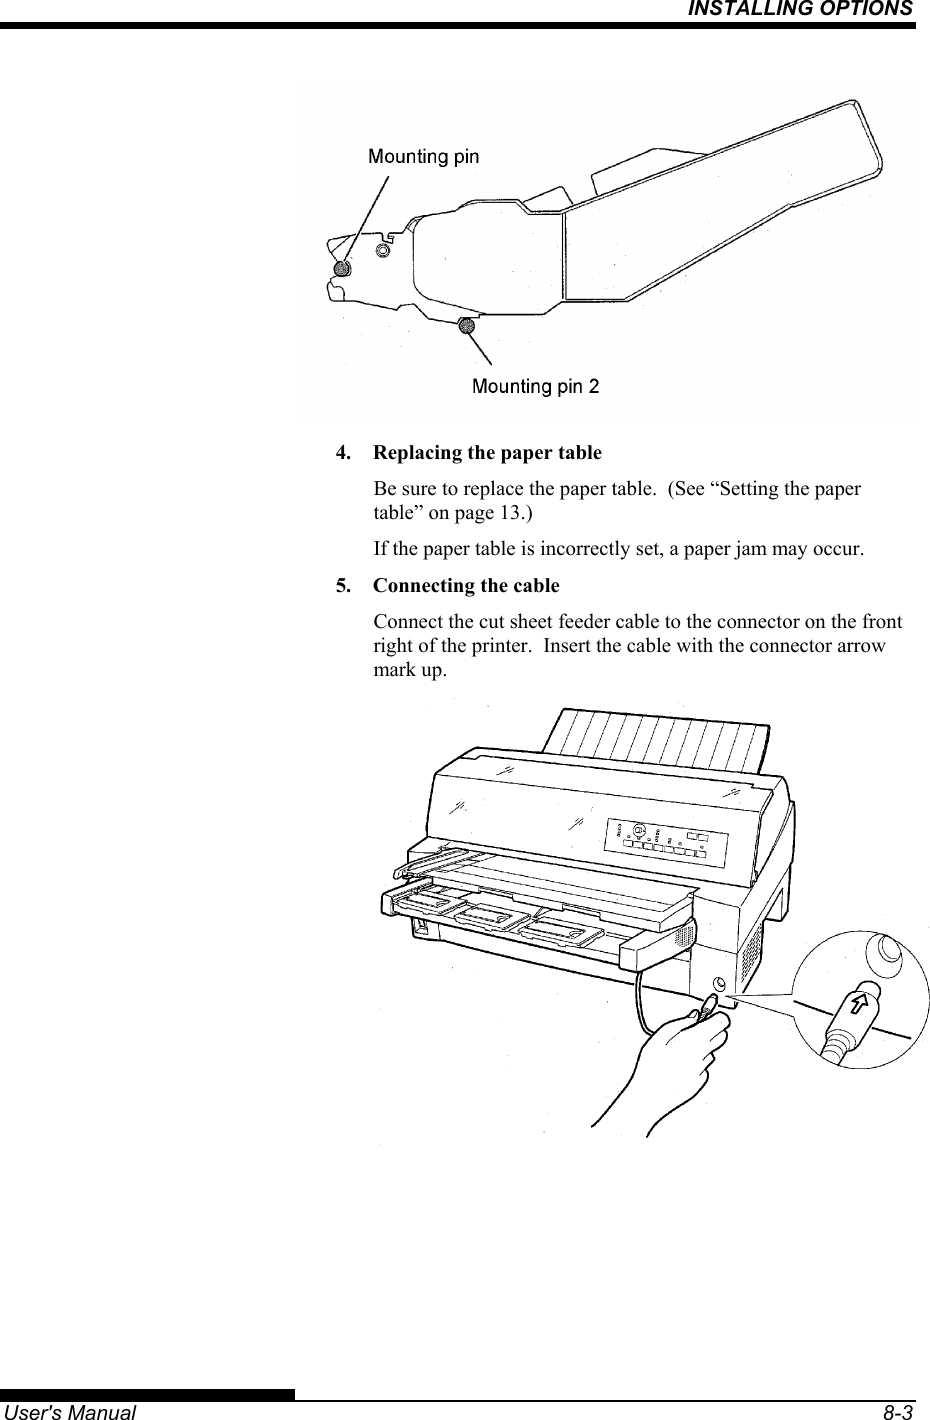 INSTALLING OPTIONS   User&apos;s Manual  8-3  4.  Replacing the paper table Be sure to replace the paper table.  (See “Setting the paper table” on page 13.) If the paper table is incorrectly set, a paper jam may occur. 5.  Connecting the cable Connect the cut sheet feeder cable to the connector on the front right of the printer.  Insert the cable with the connector arrow mark up.  